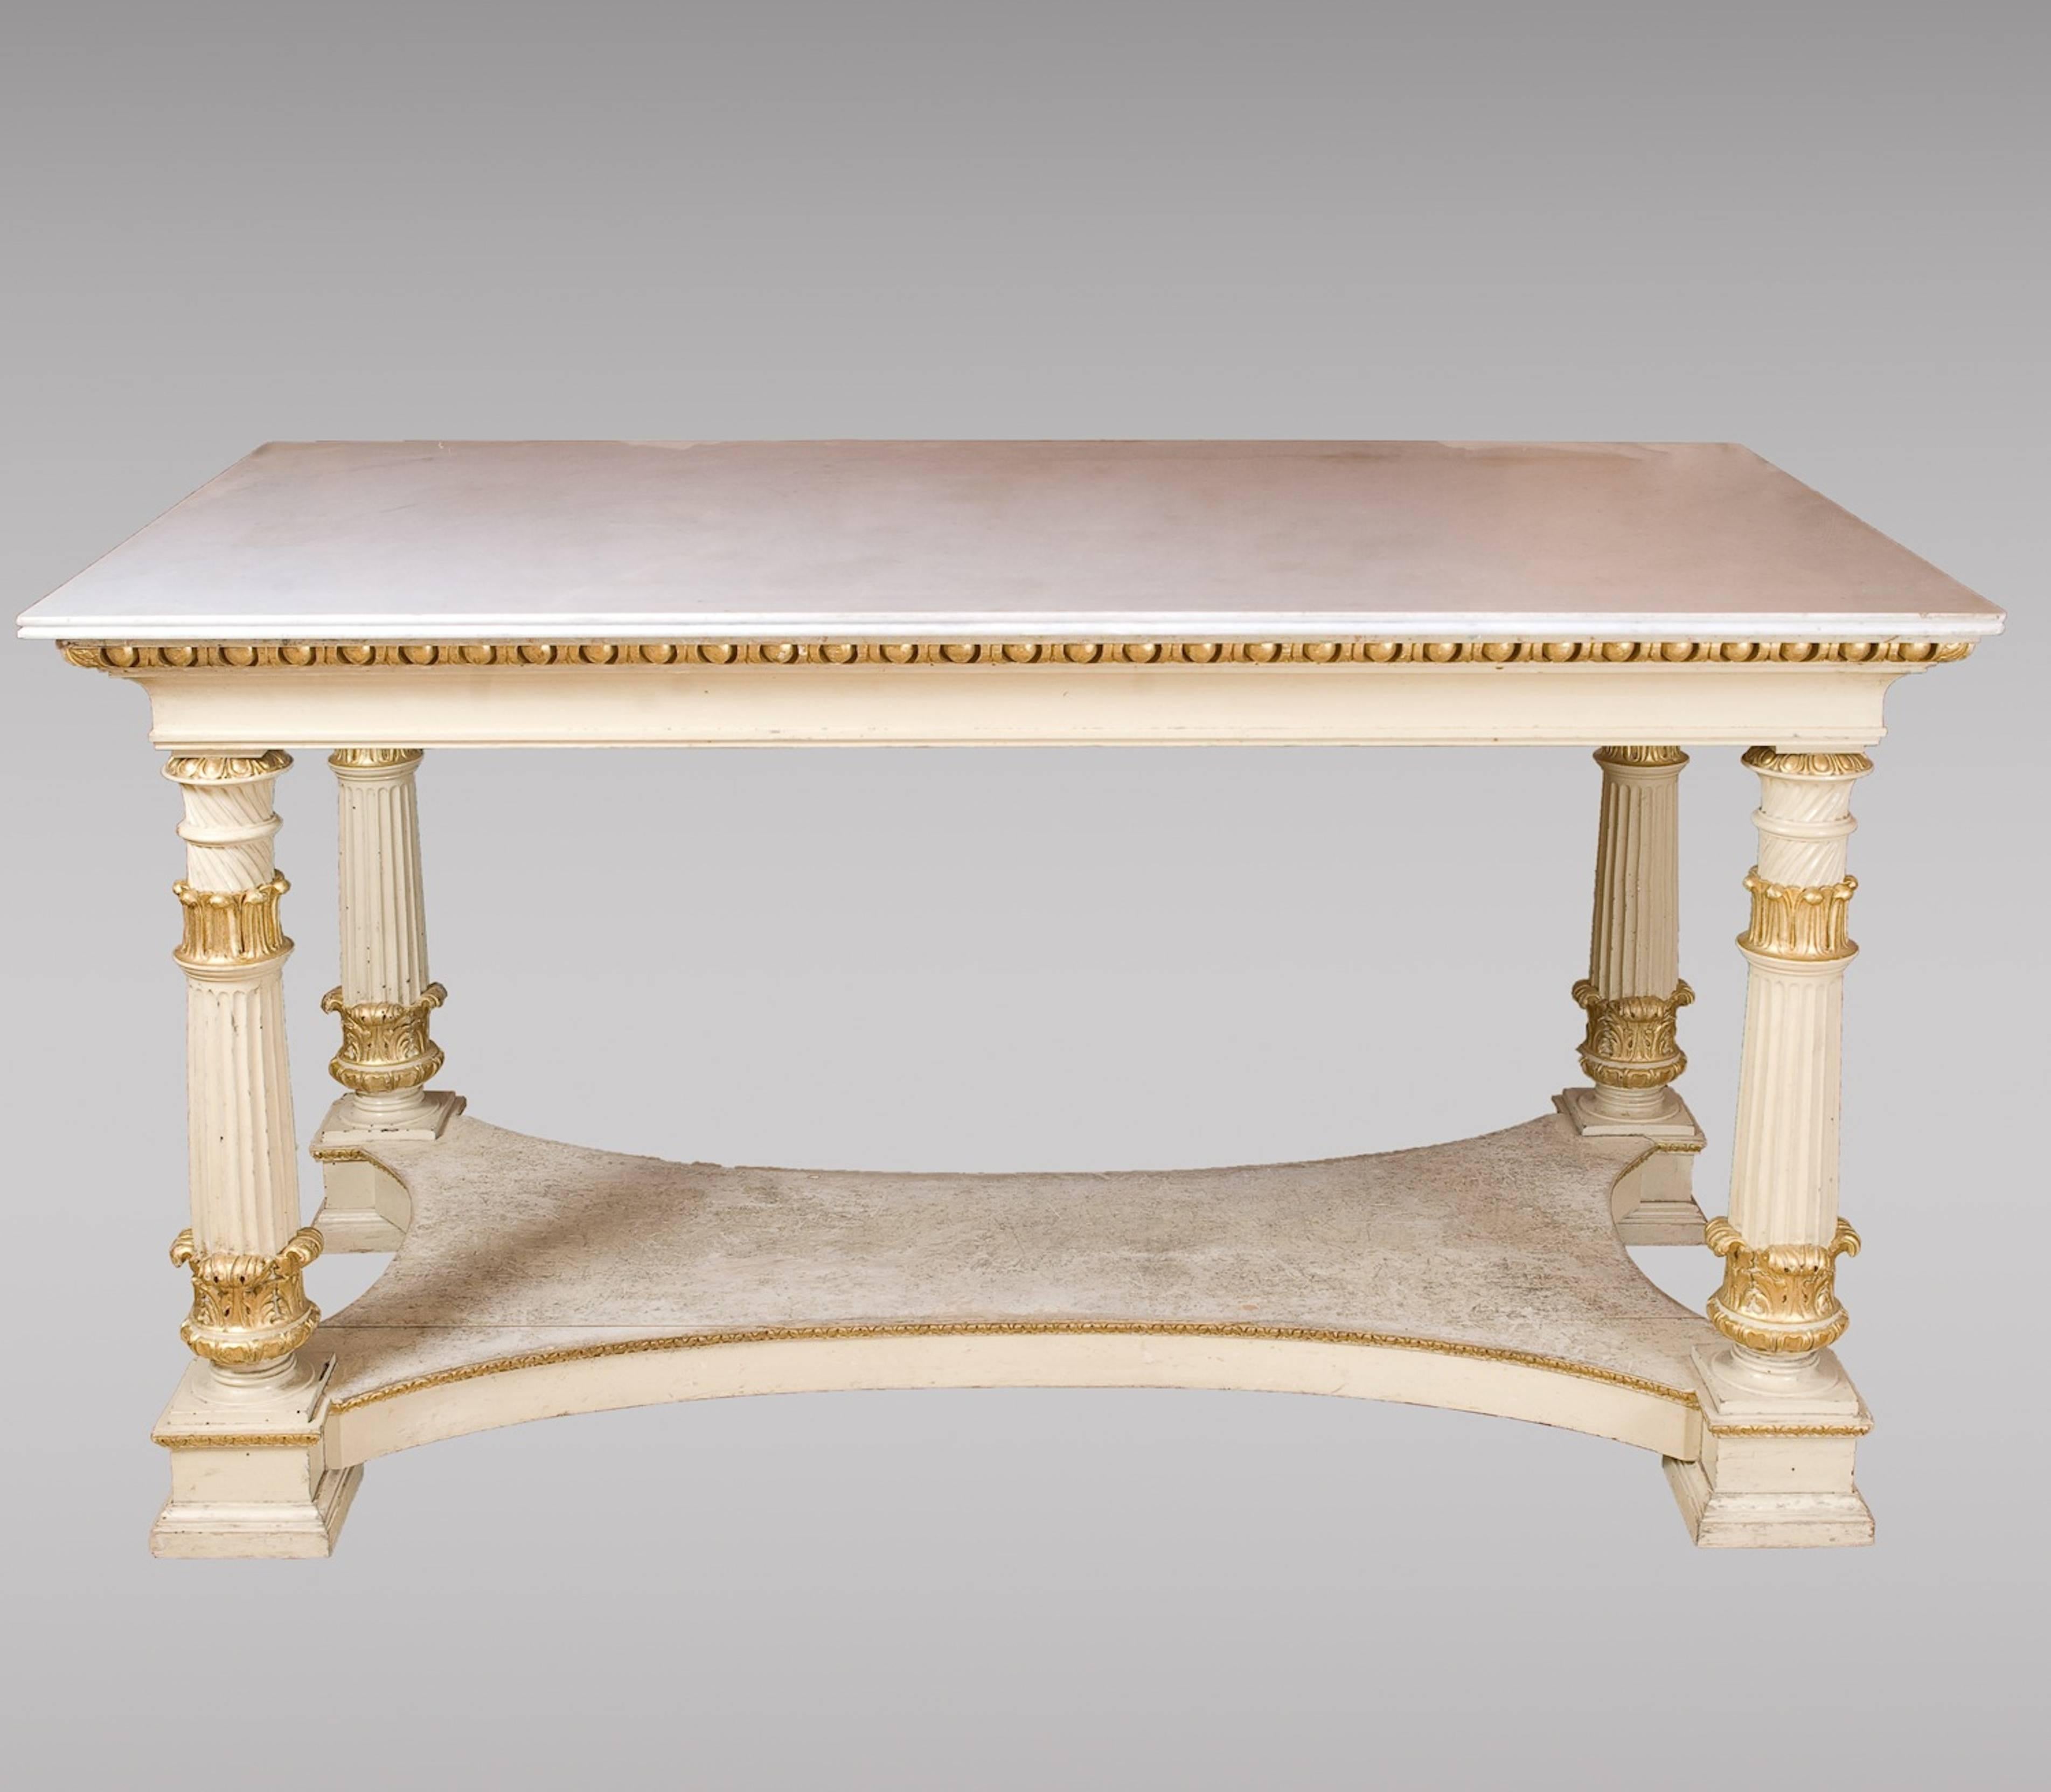 Two painted and gilded center tables, 19th century.
Some old holes.
White marble tops.
(May sell one piece).

.